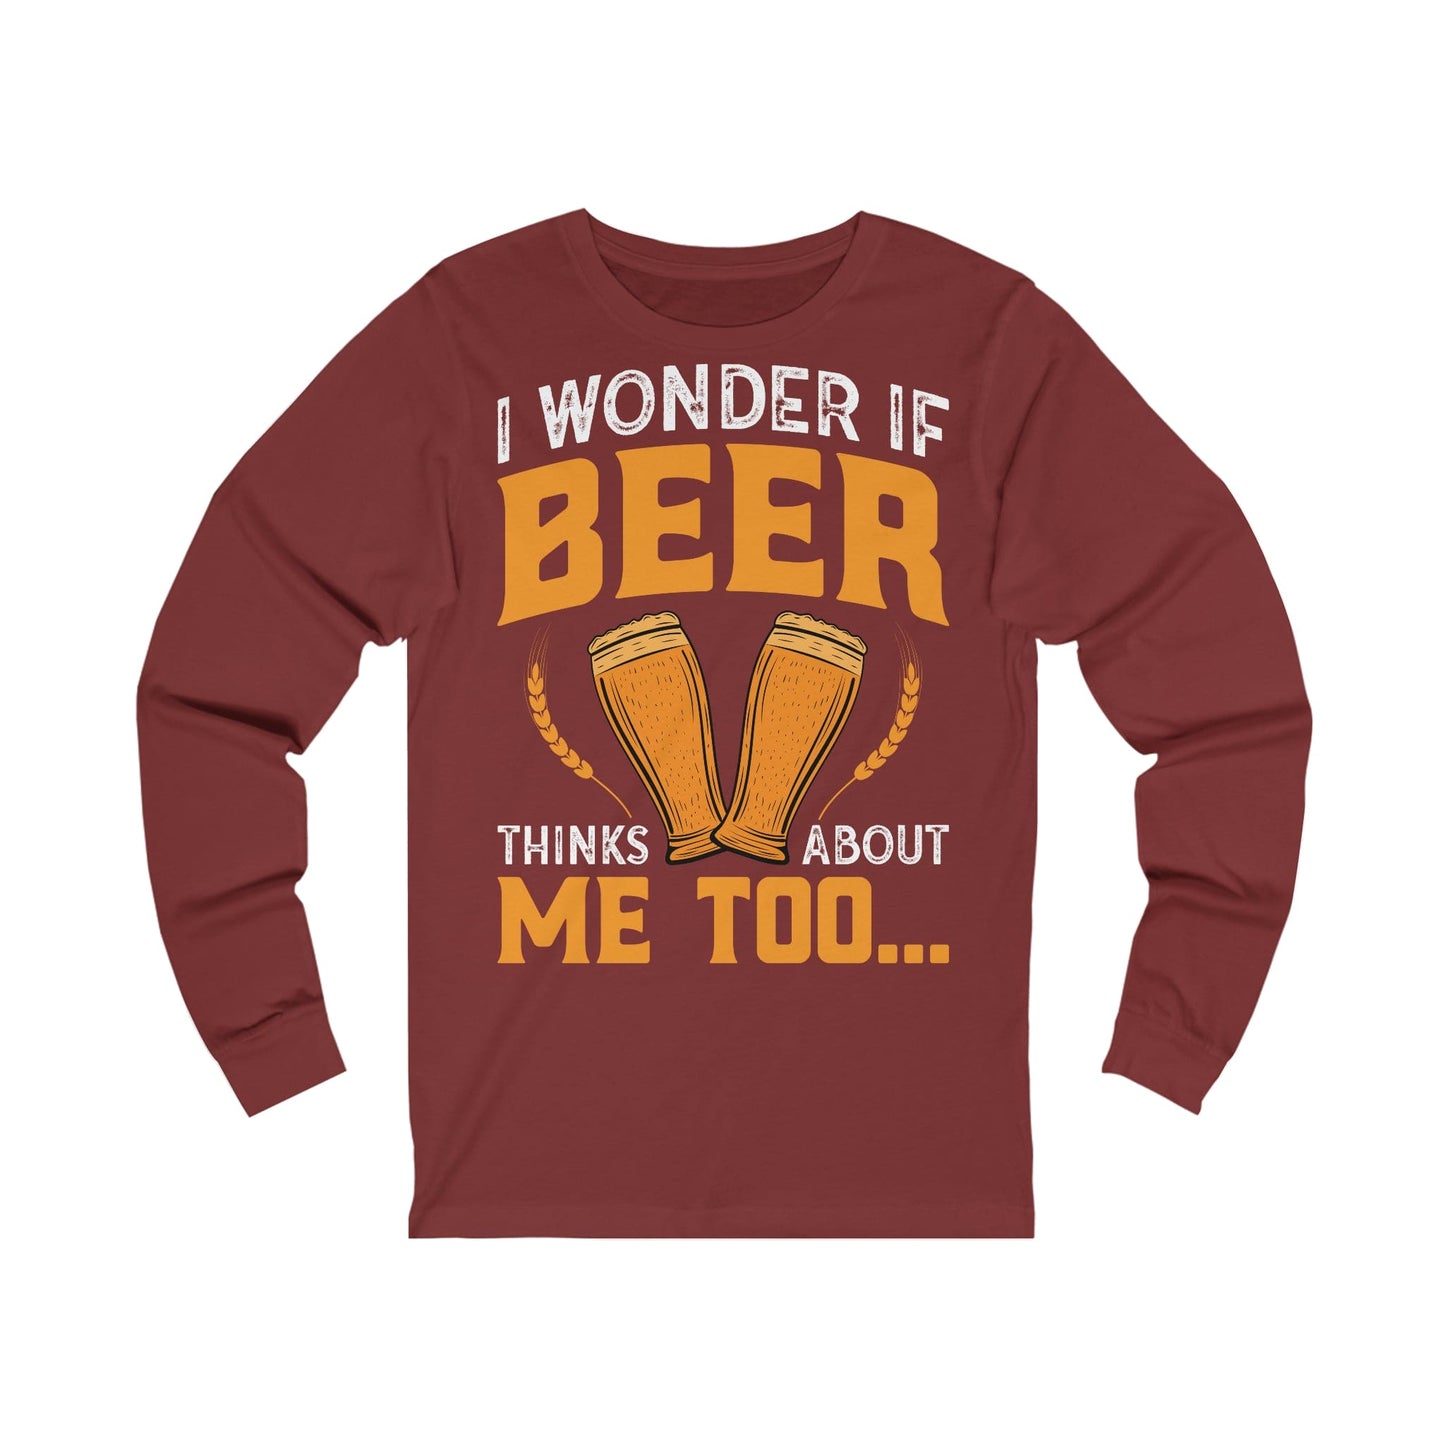 Does Beer think about me too-long sleeve tee